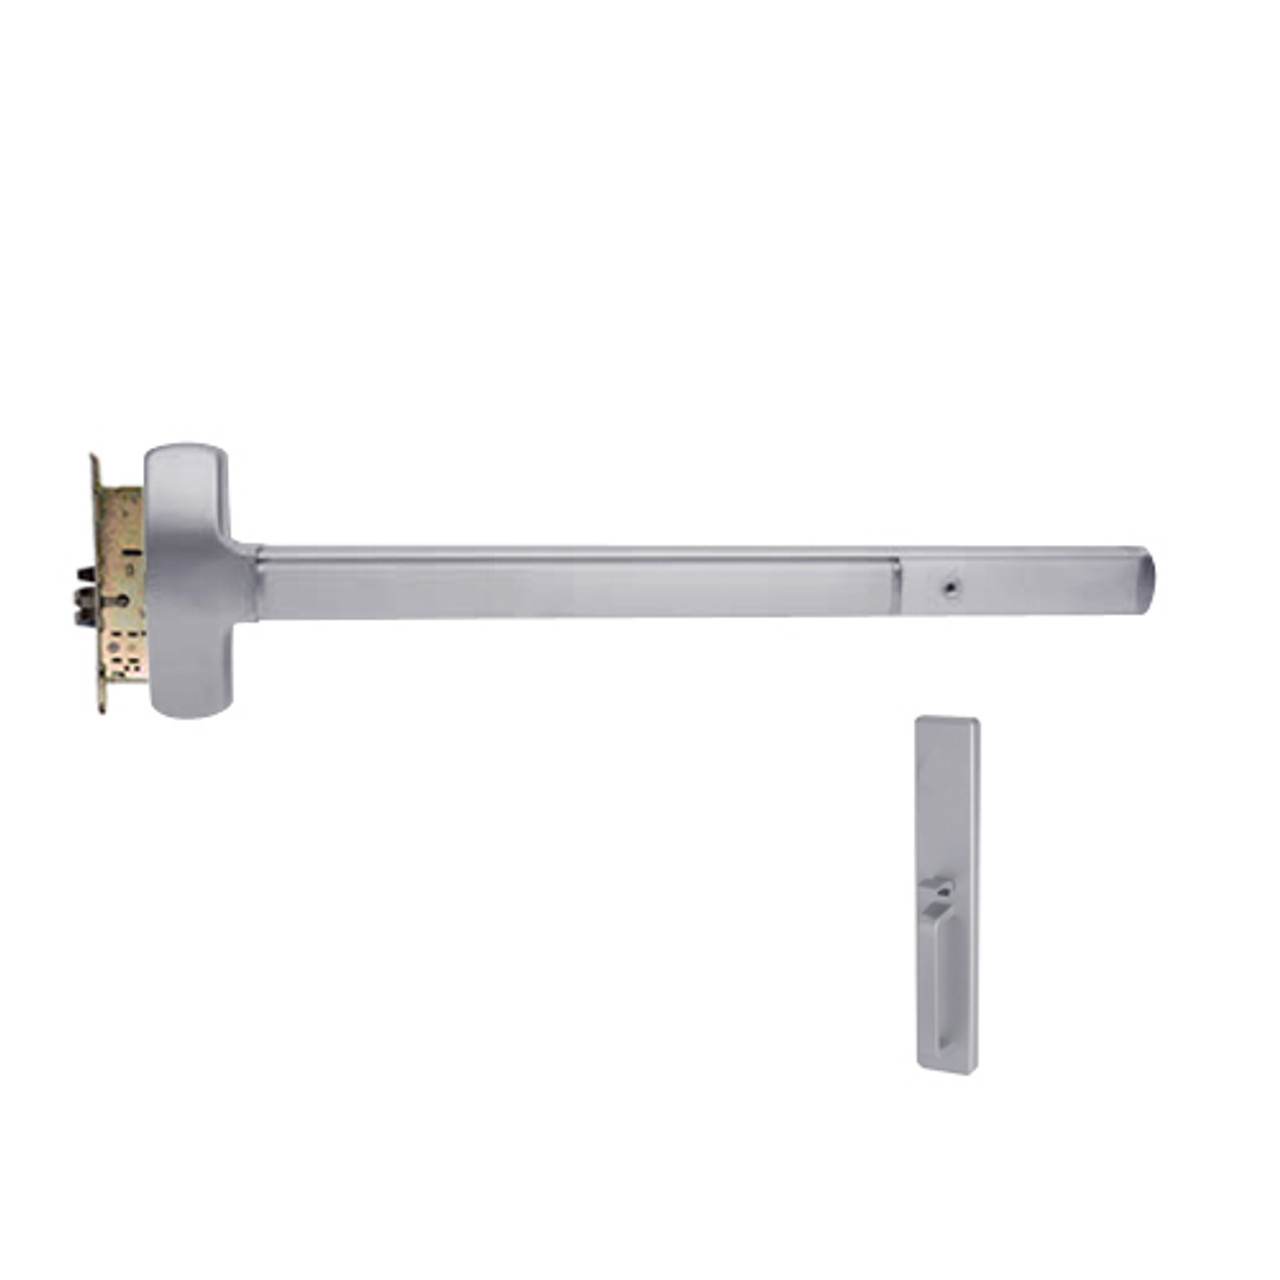 25-M-TP-BE-US26D-4-LHR Falcon Exit Device in Satin Chrome